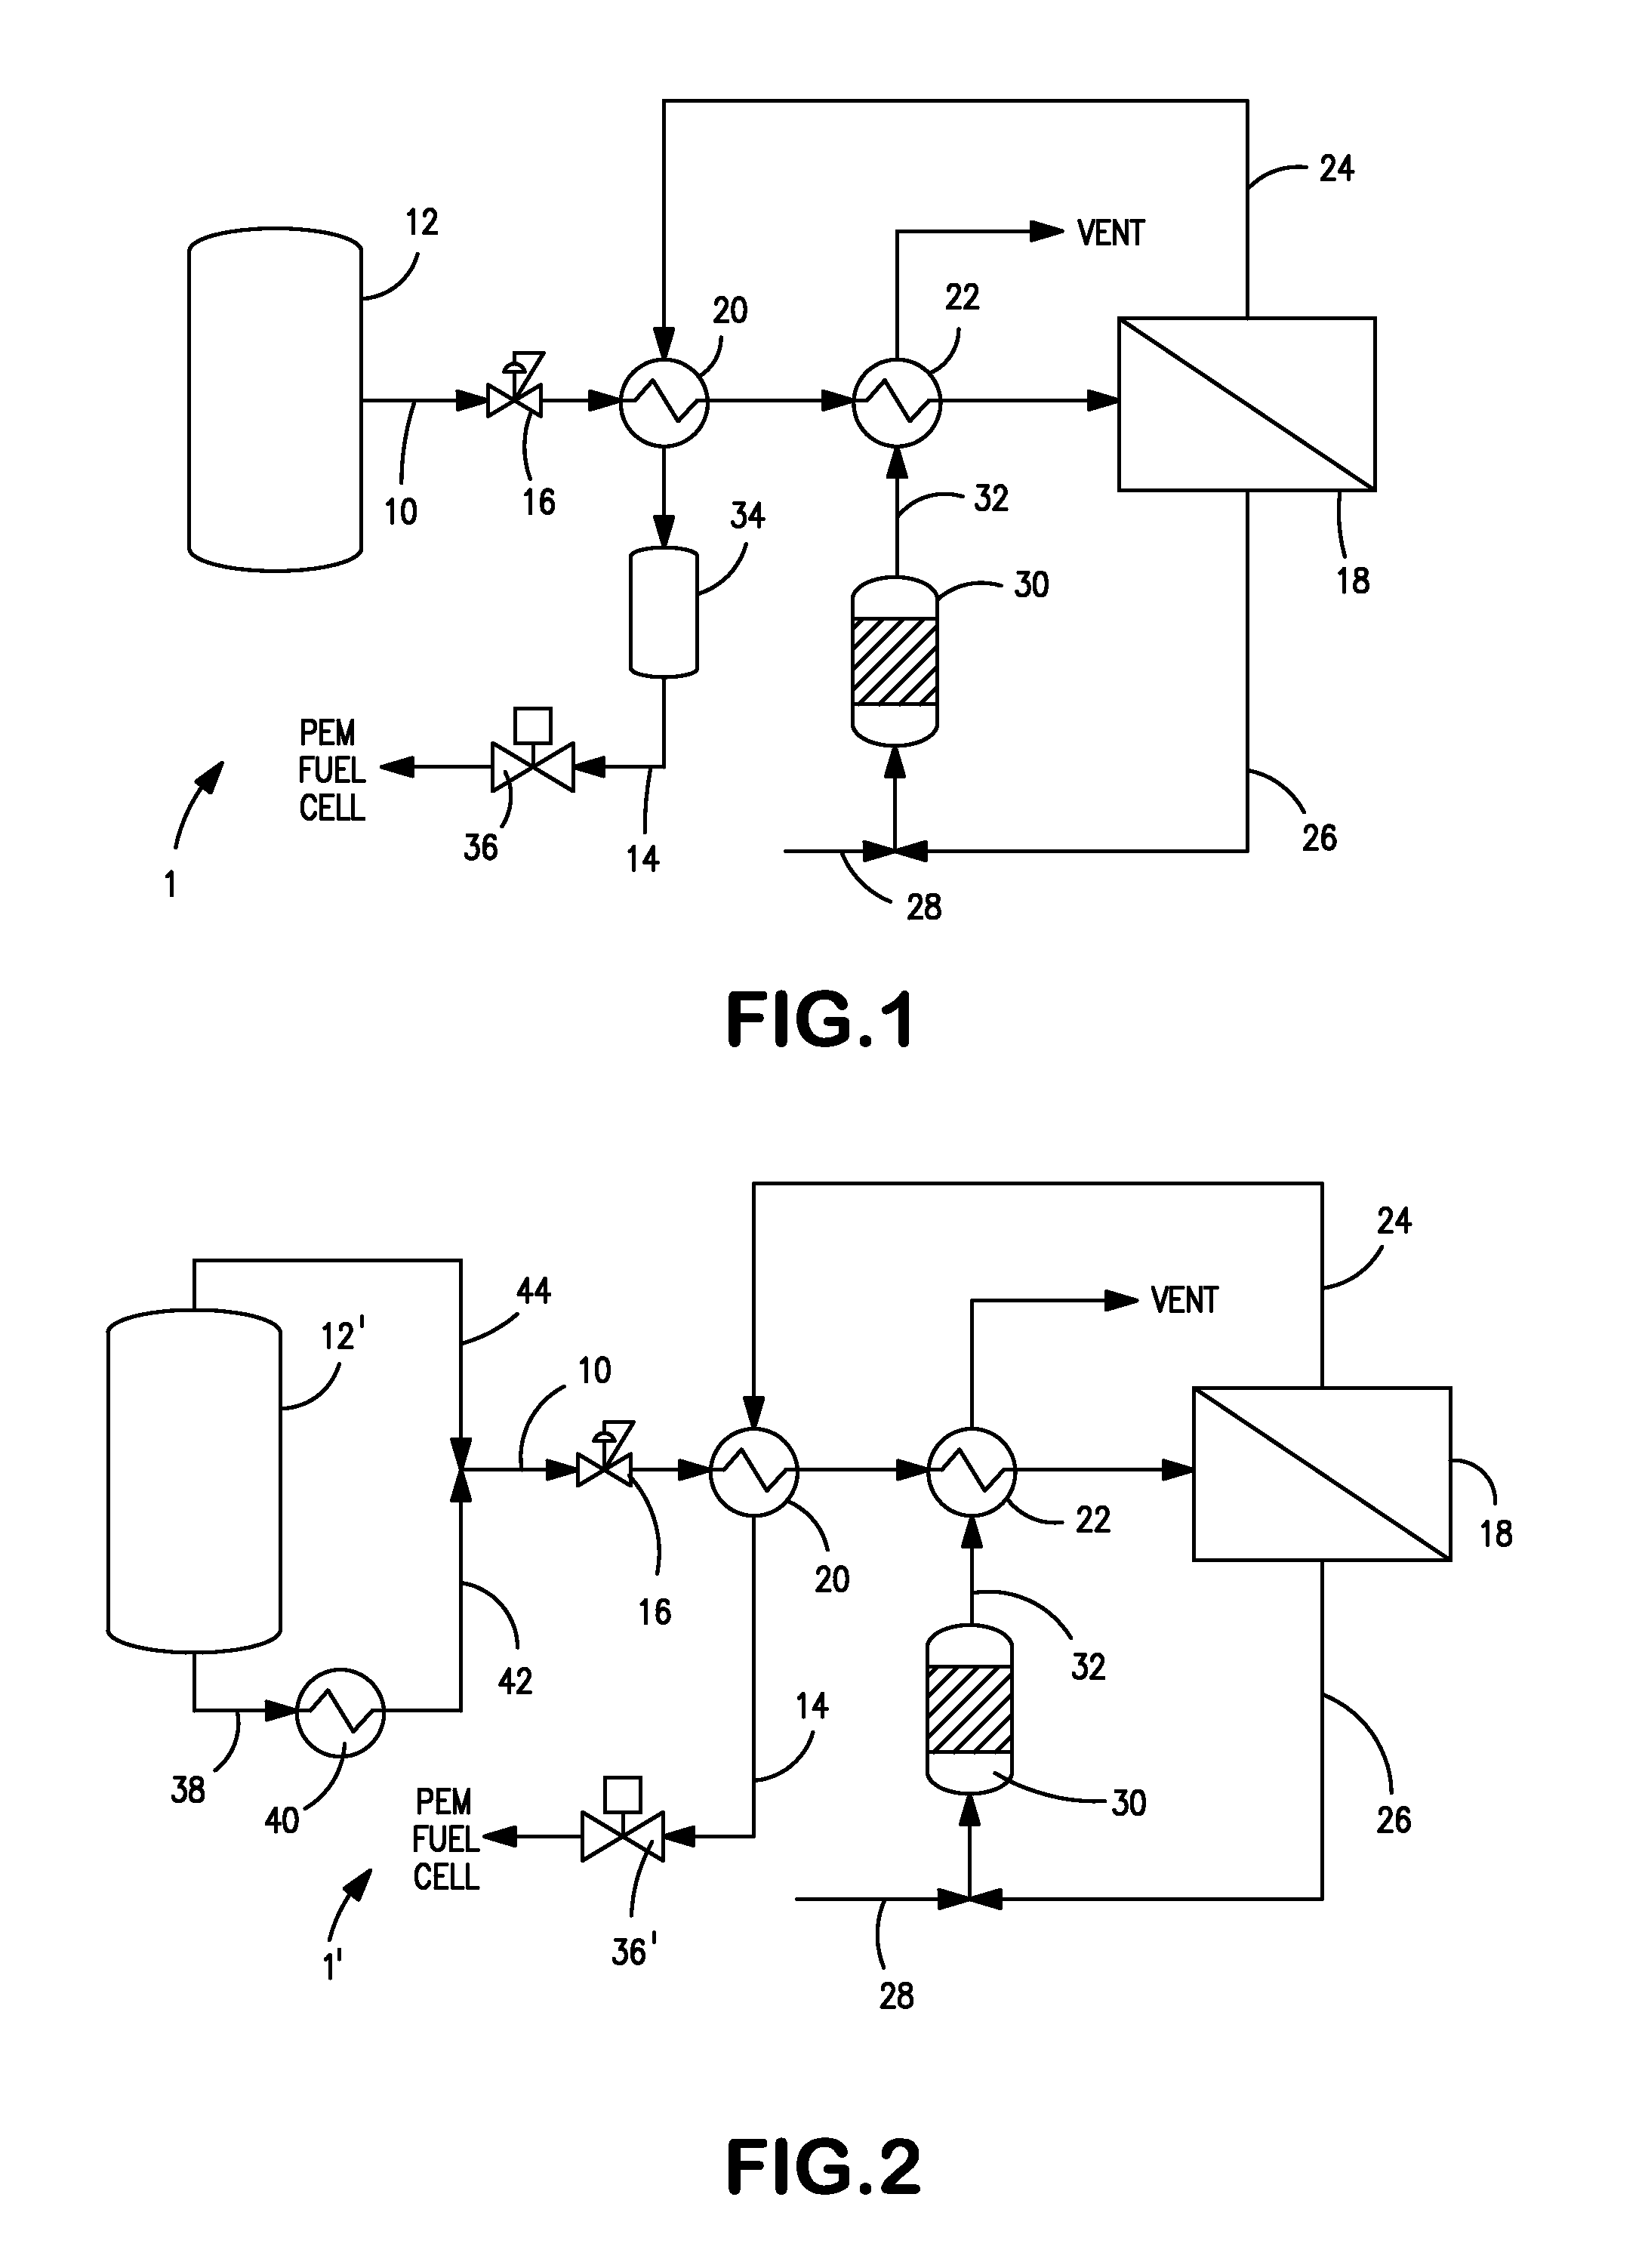 Hydrogen purification for fuel cell vehicle